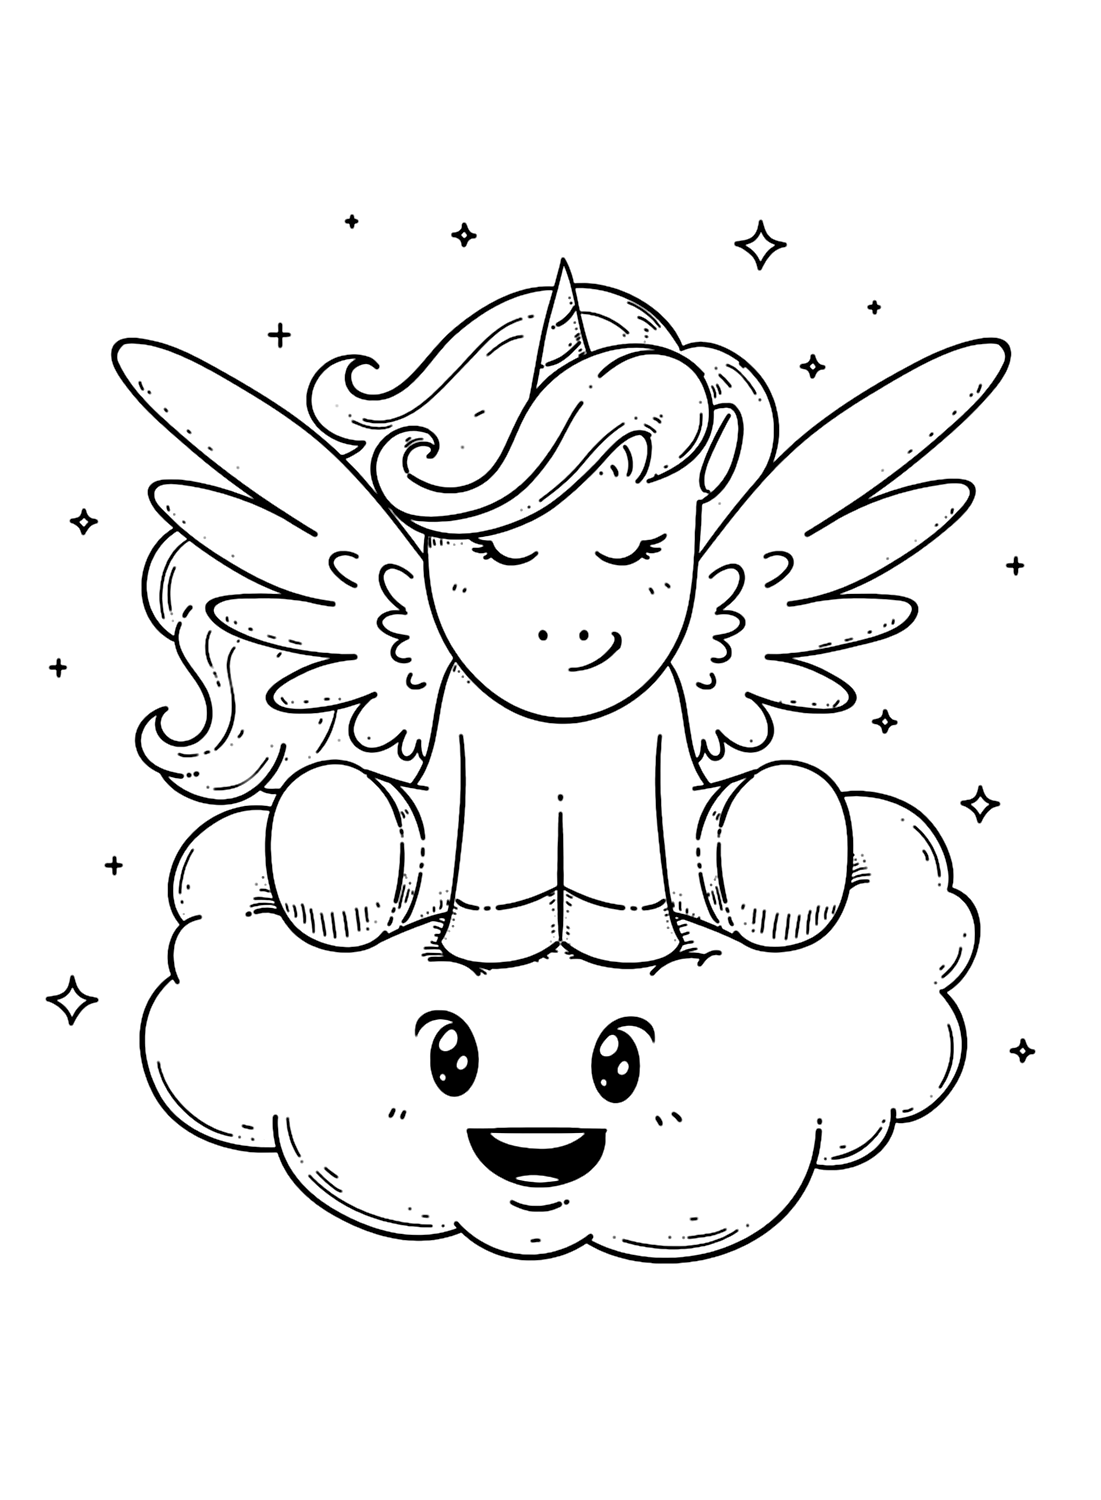 Angel Pony coloring pages